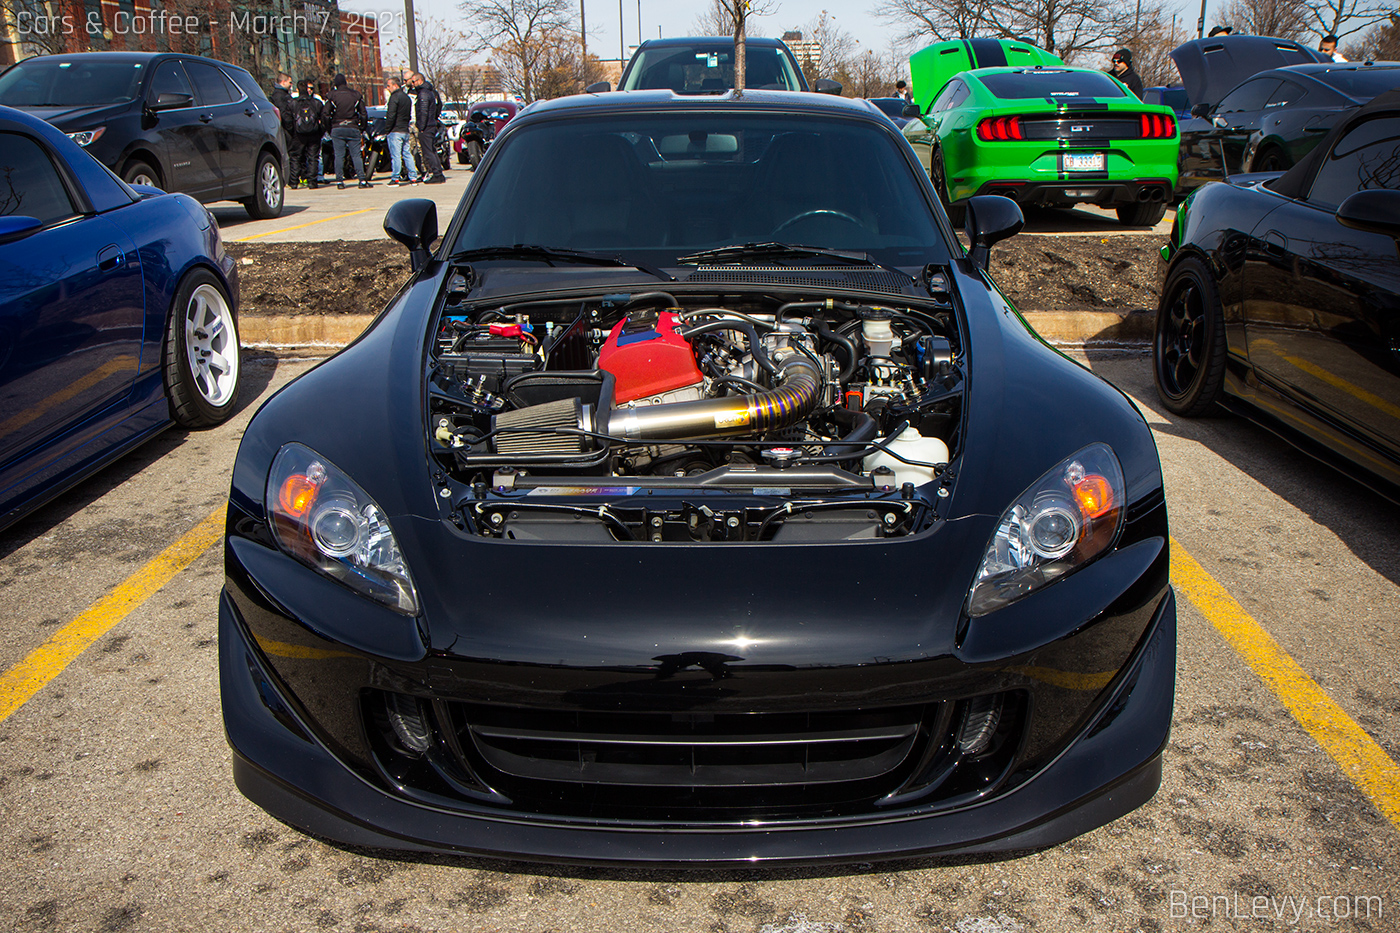 Black Honda S2000 with the hood removed